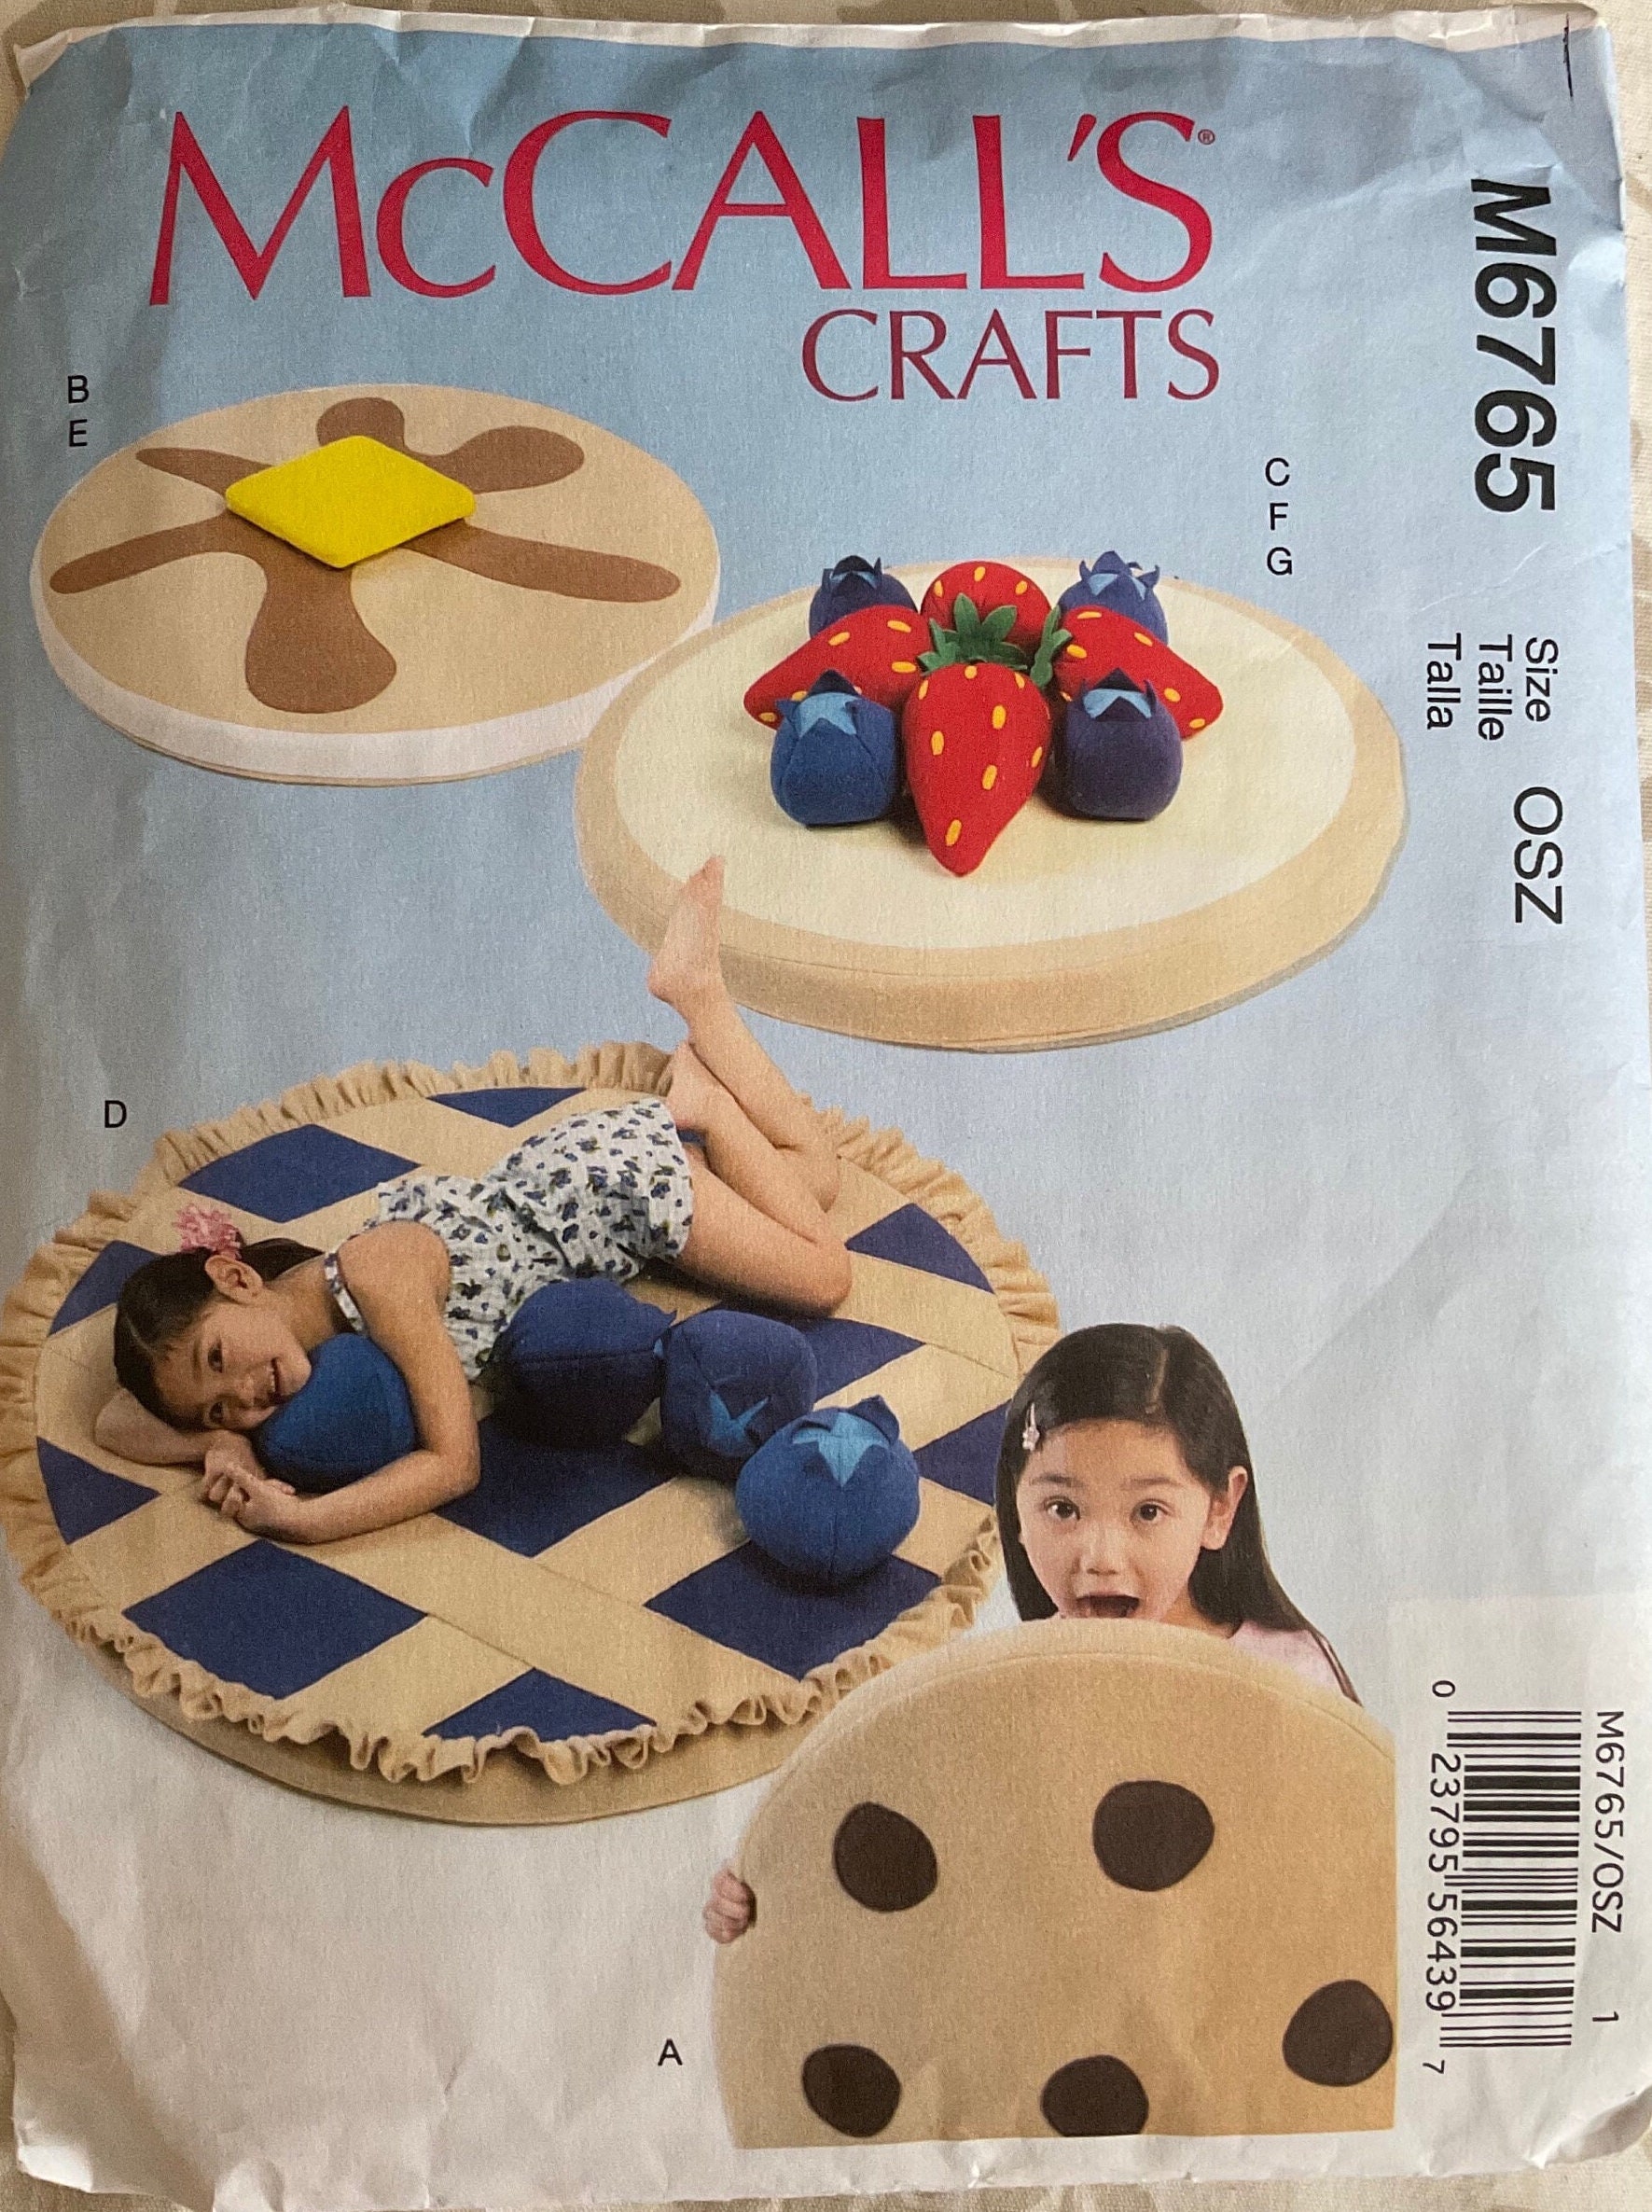 McCall's Patterns, Sewing And Craft Patterns